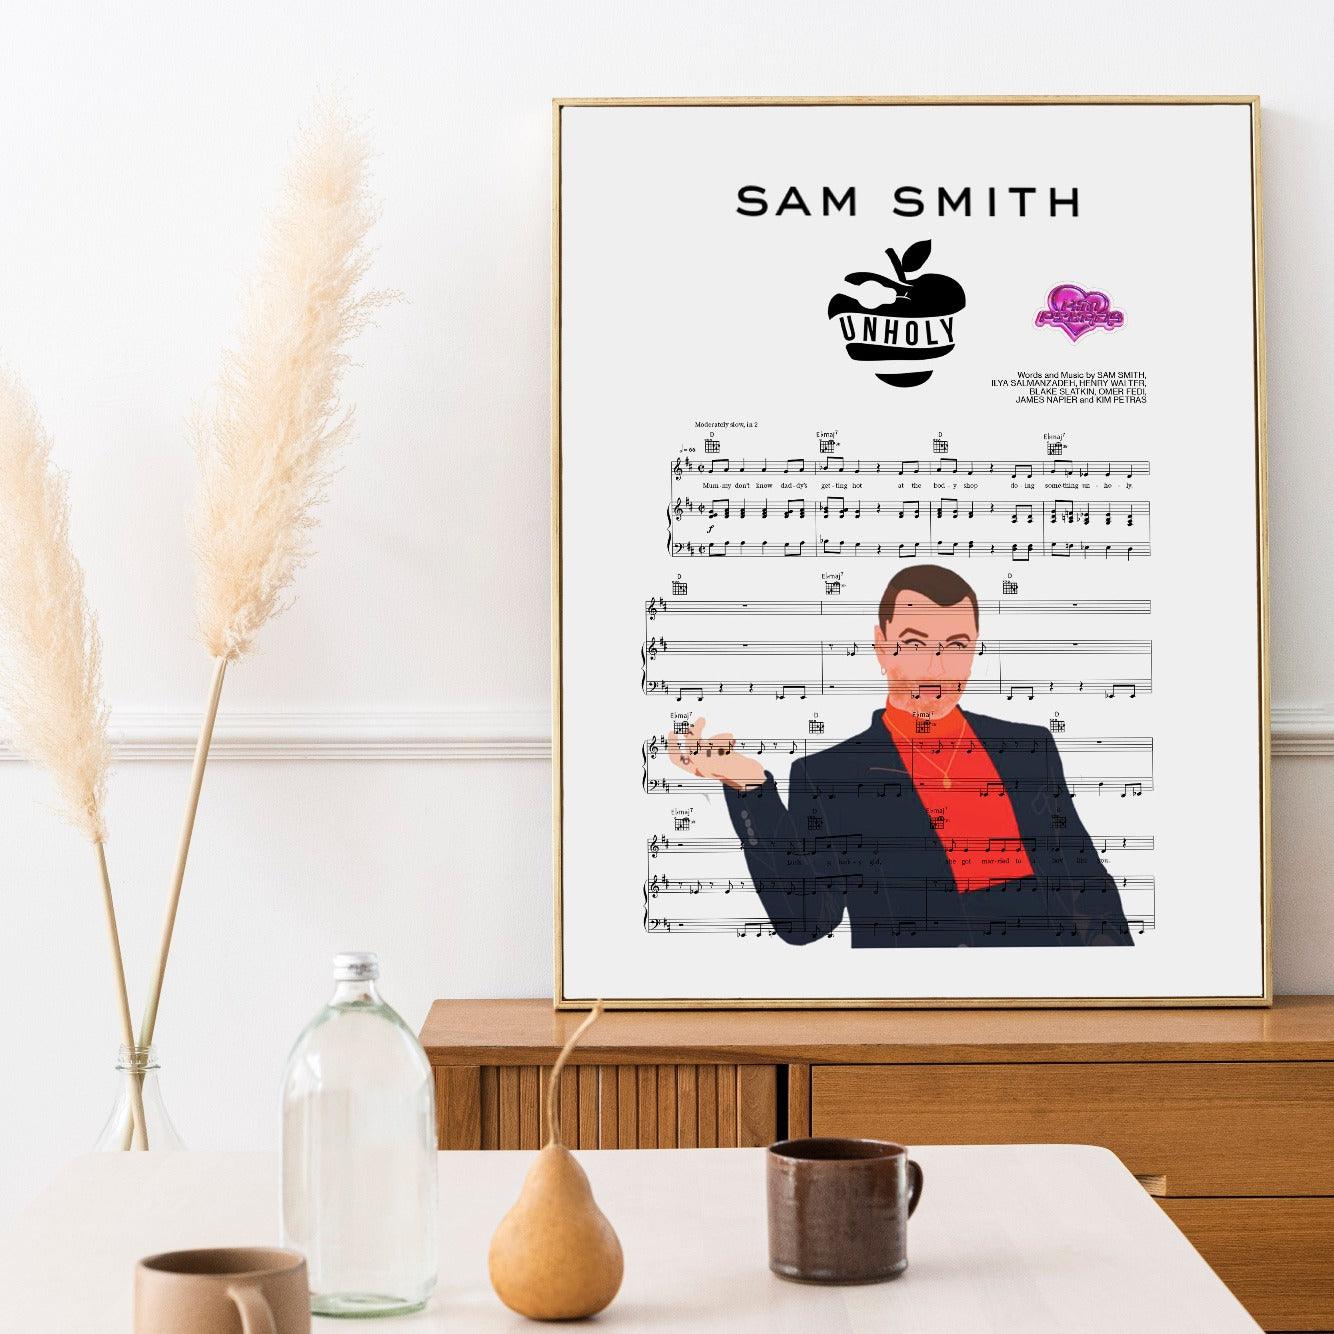 Are you a fan of Sam Smith? We have the perfect print for you. This stylish poster of Sam Smith is the perfect addition to any music lover's bedroom. Printed on high quality paper, this poster is a must have for any fan of the British singer.